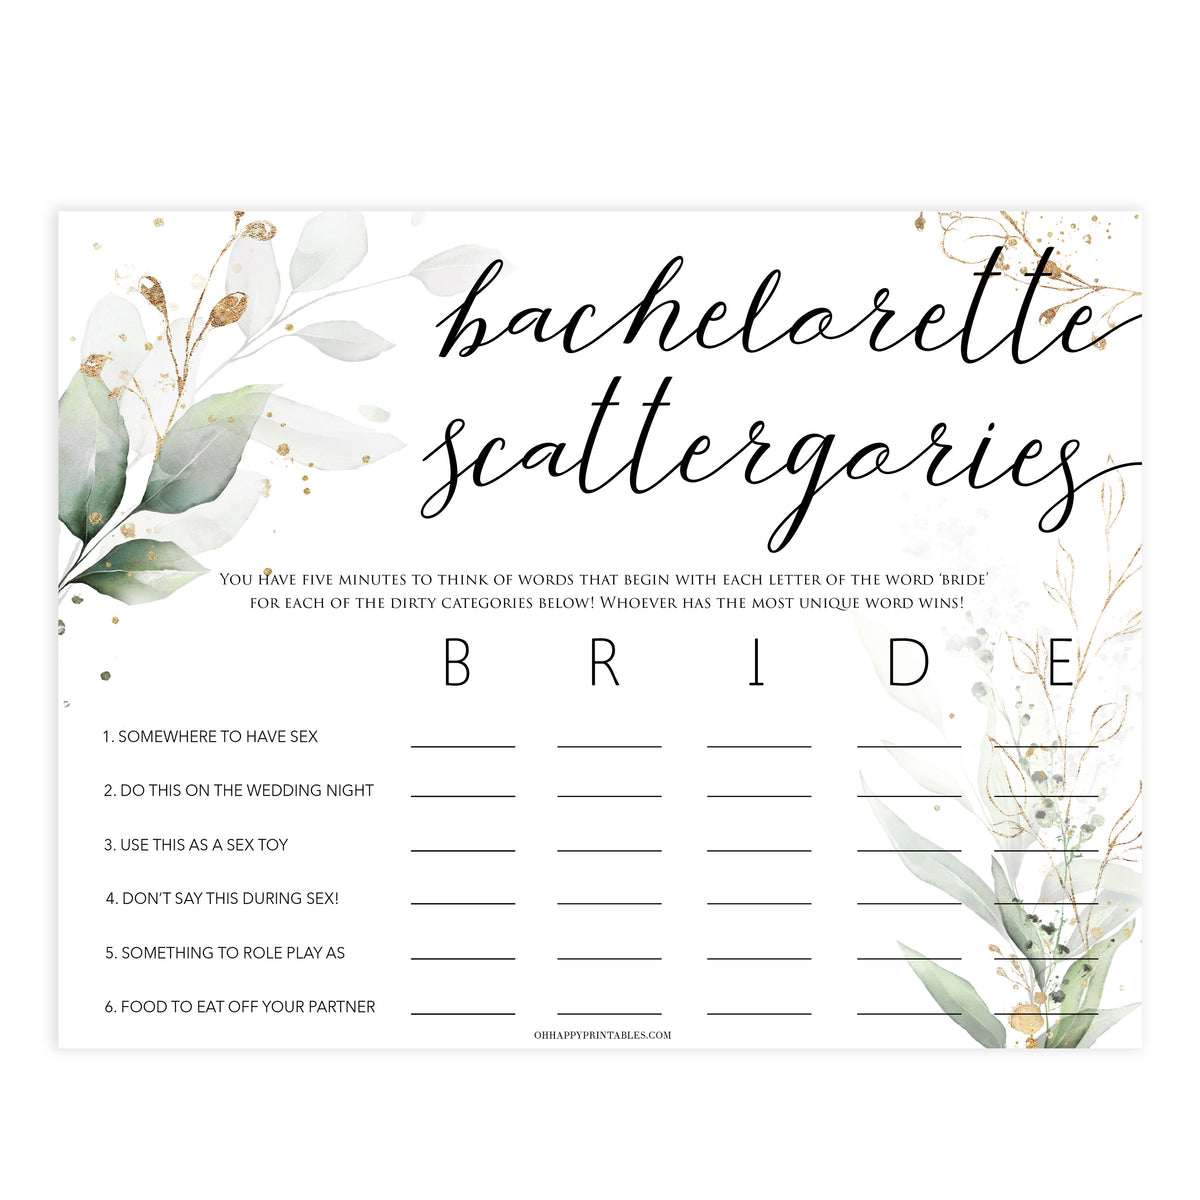 bachelorette scattergories game, Printable bachelorette games, greenery bachelorette, gold leaf hen party games, fun hen party games, bachelorette game ideas, greenery adult party games, naughty hen games, naughty bachelorette games